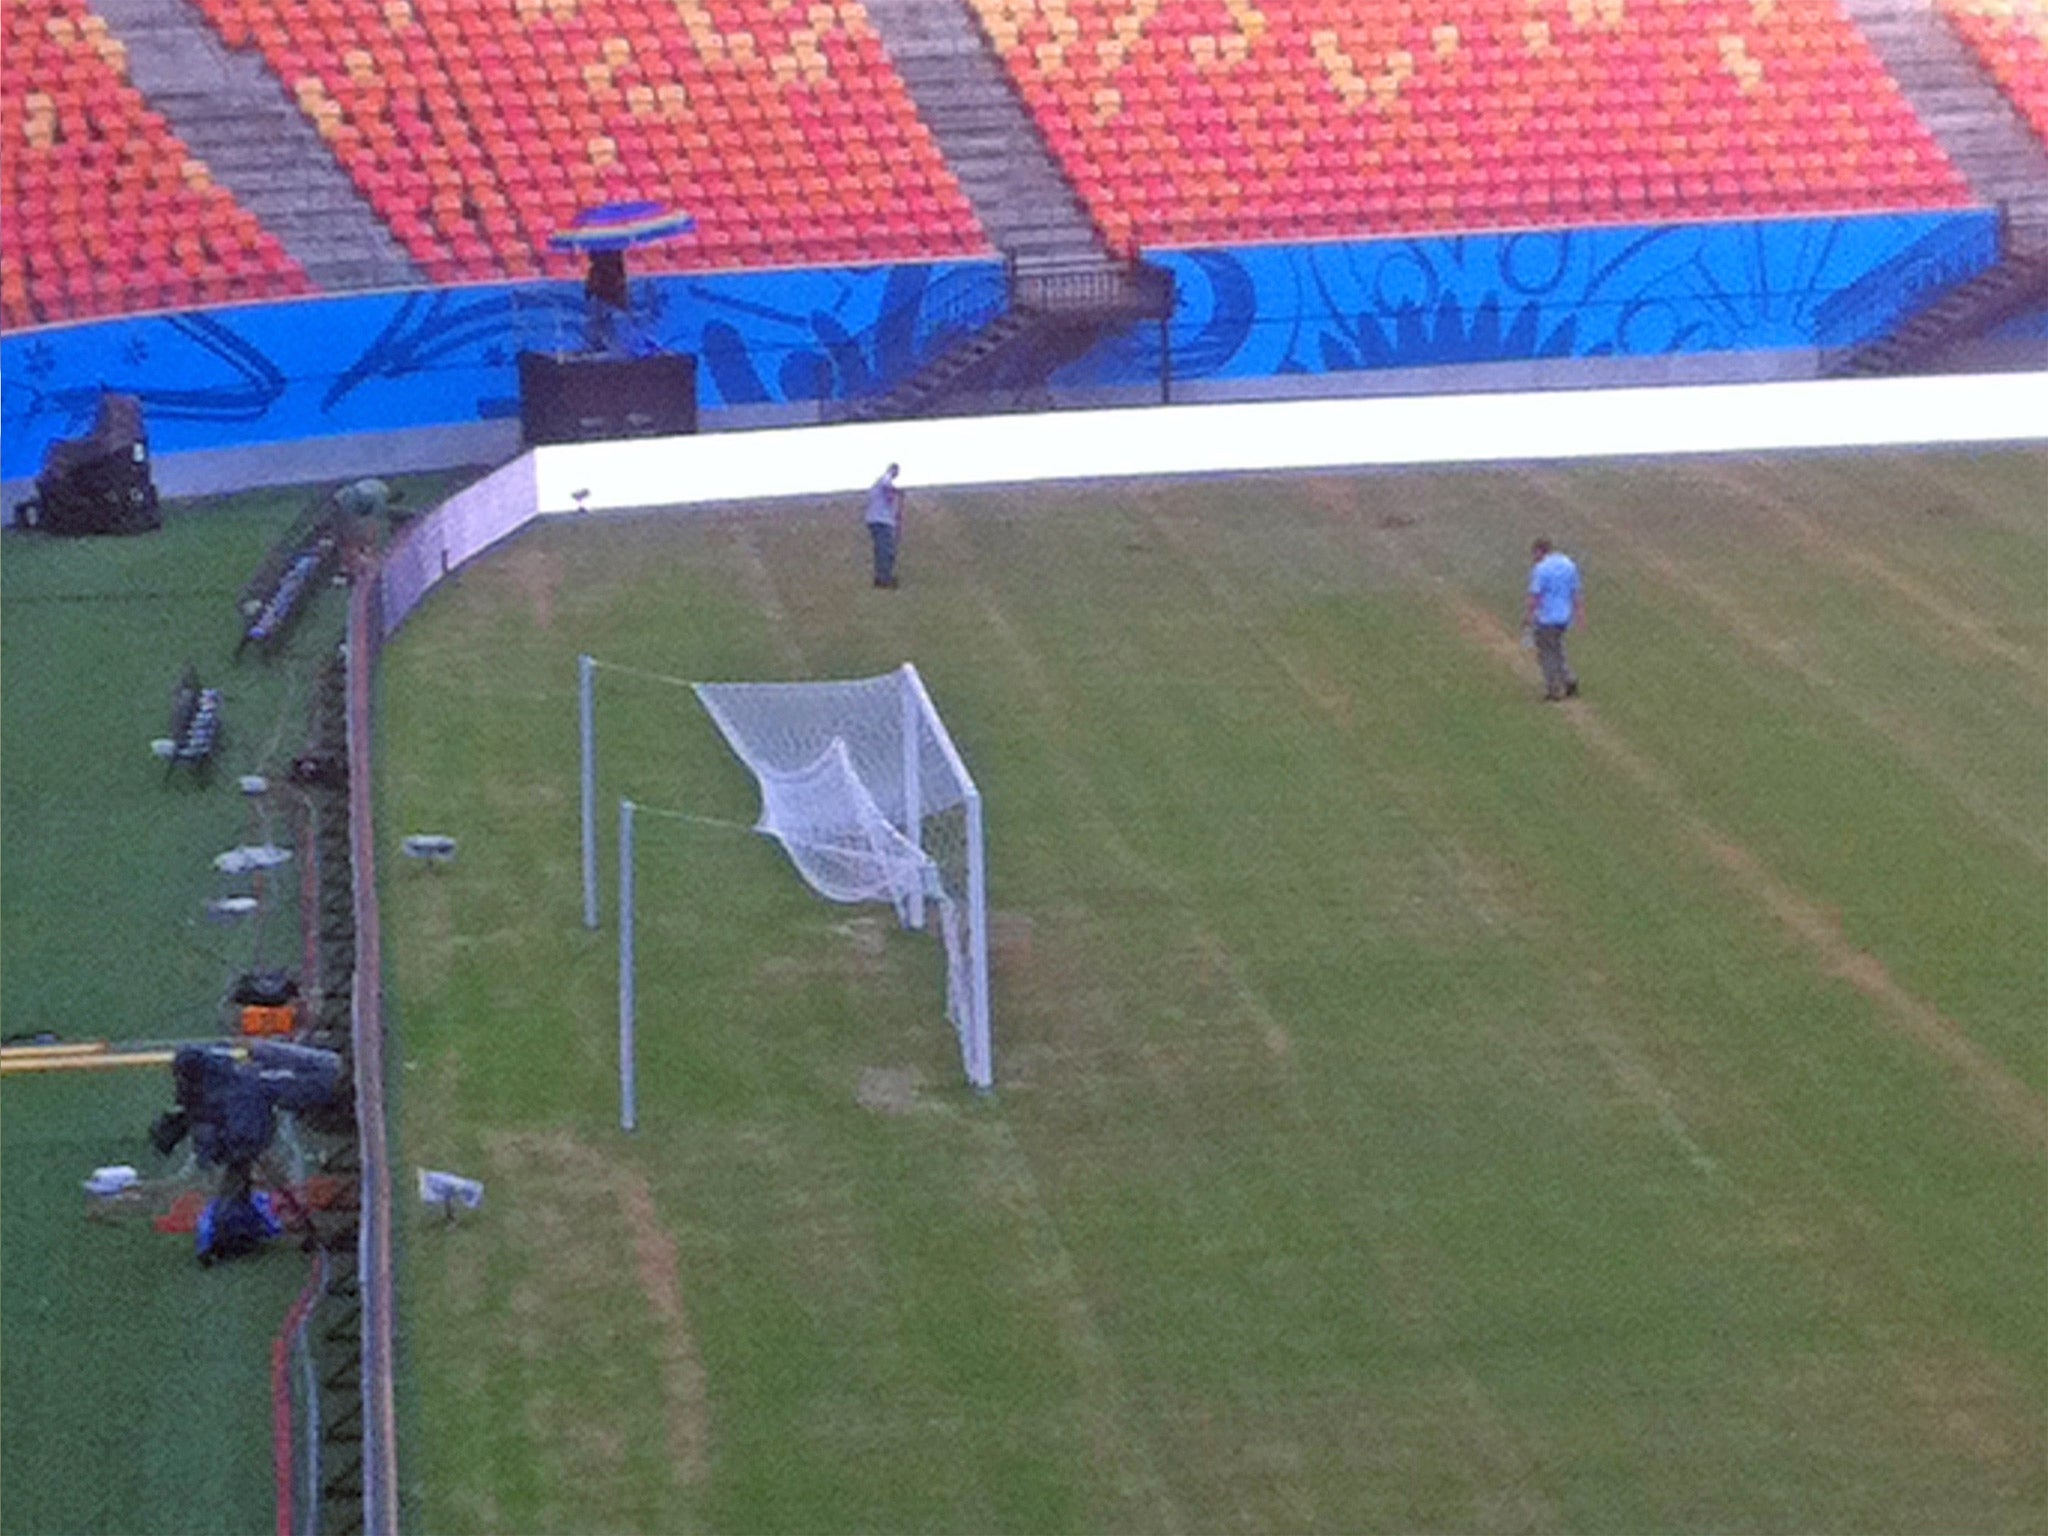 The pitch looks worn in Manaus, where England play Italy in their first game on Saturday